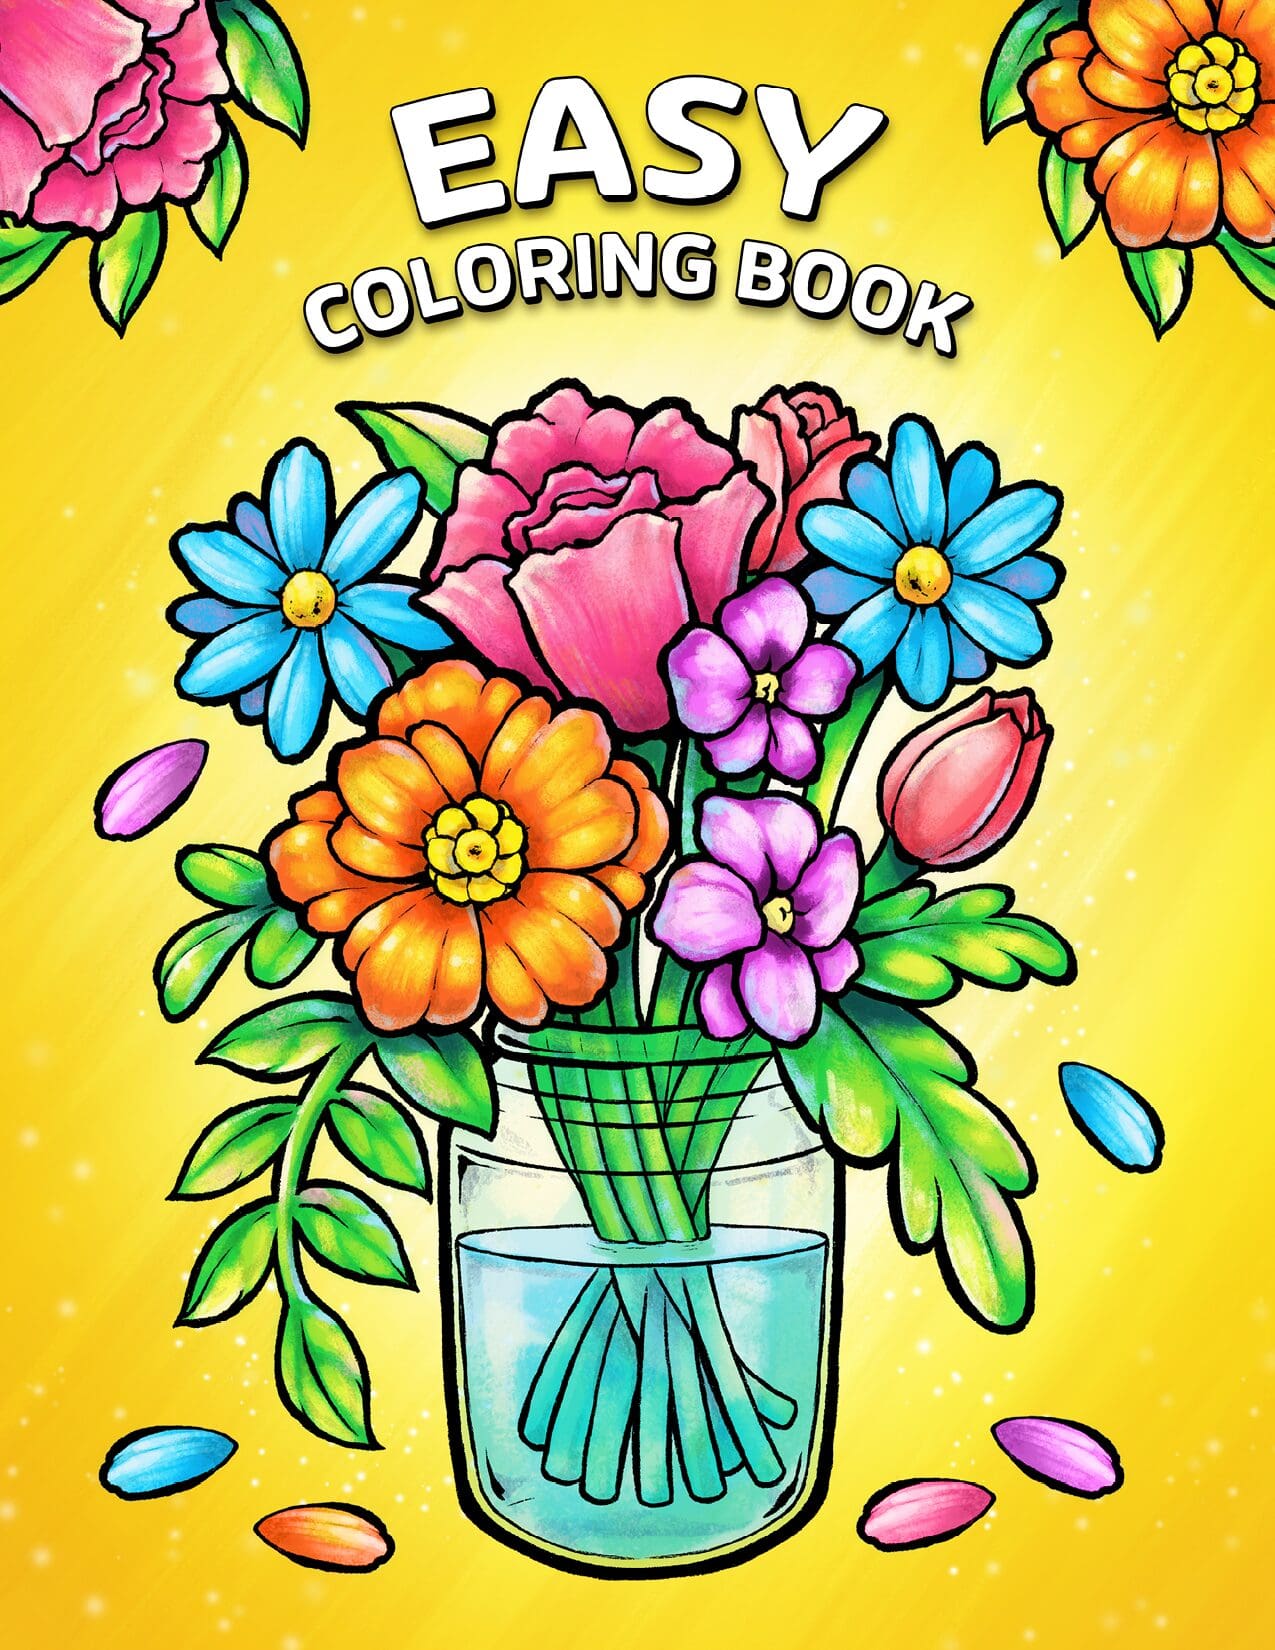 Large Print Adult Coloring Book: A Simple and Easy Coloring Book for Adults  with Large Print Animals, Flowers, and More! (Large Print / Paperback)